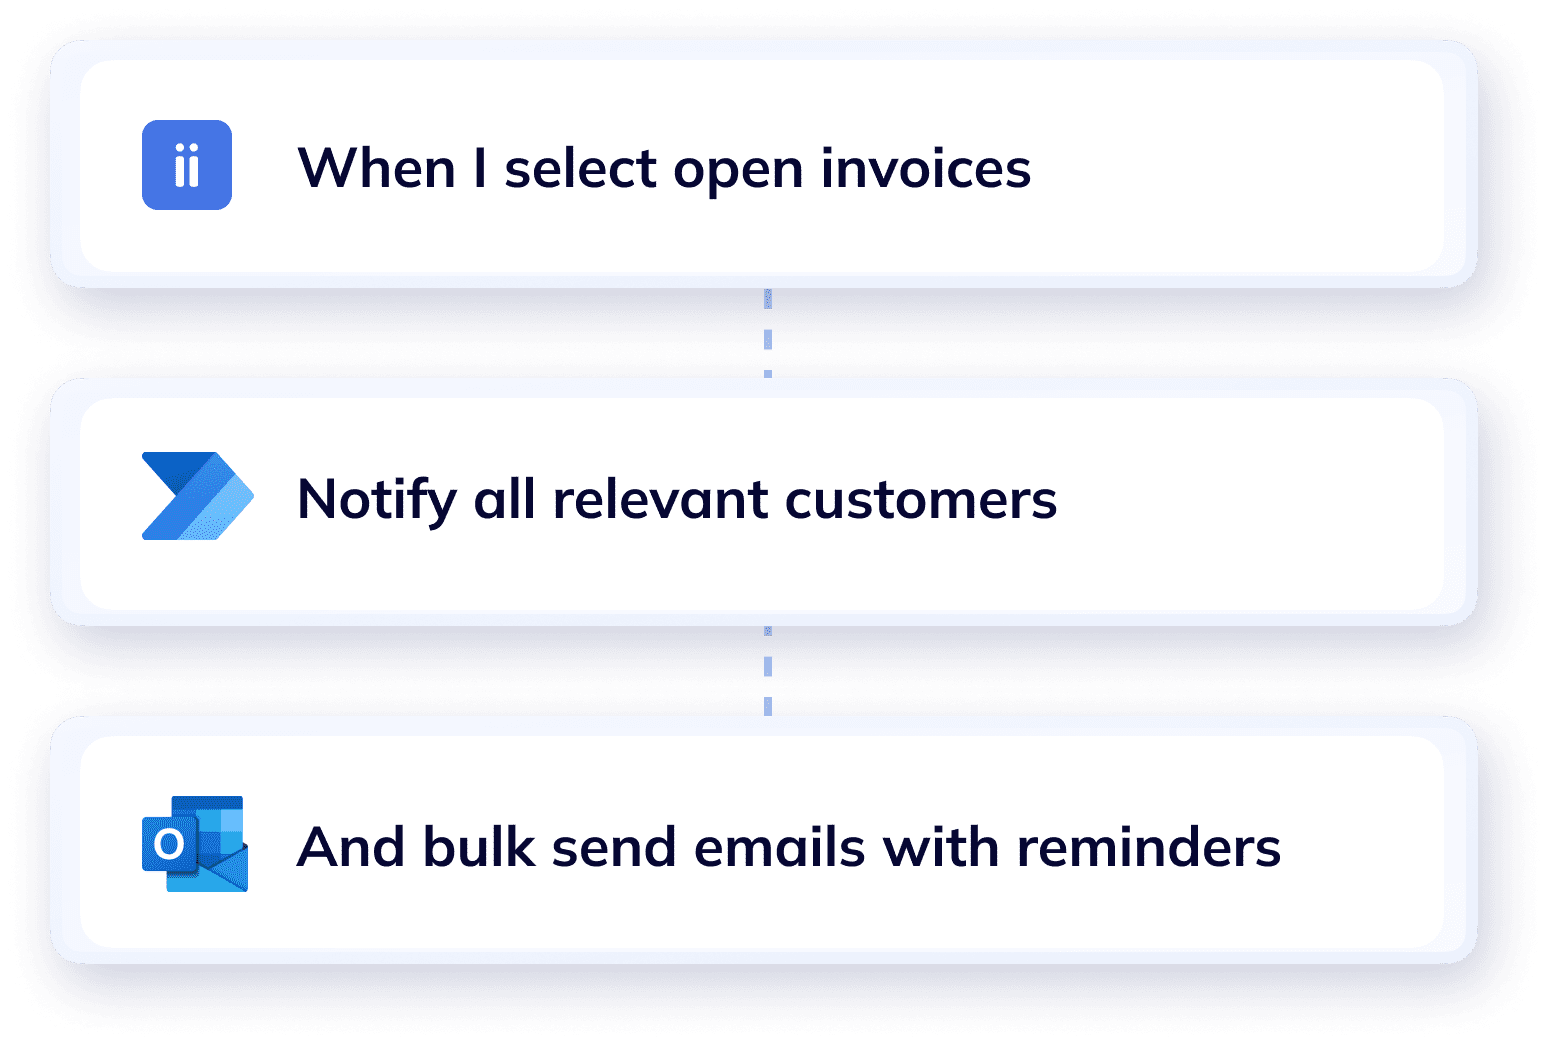 Workflow of sending invoice reminder emails in Wiise